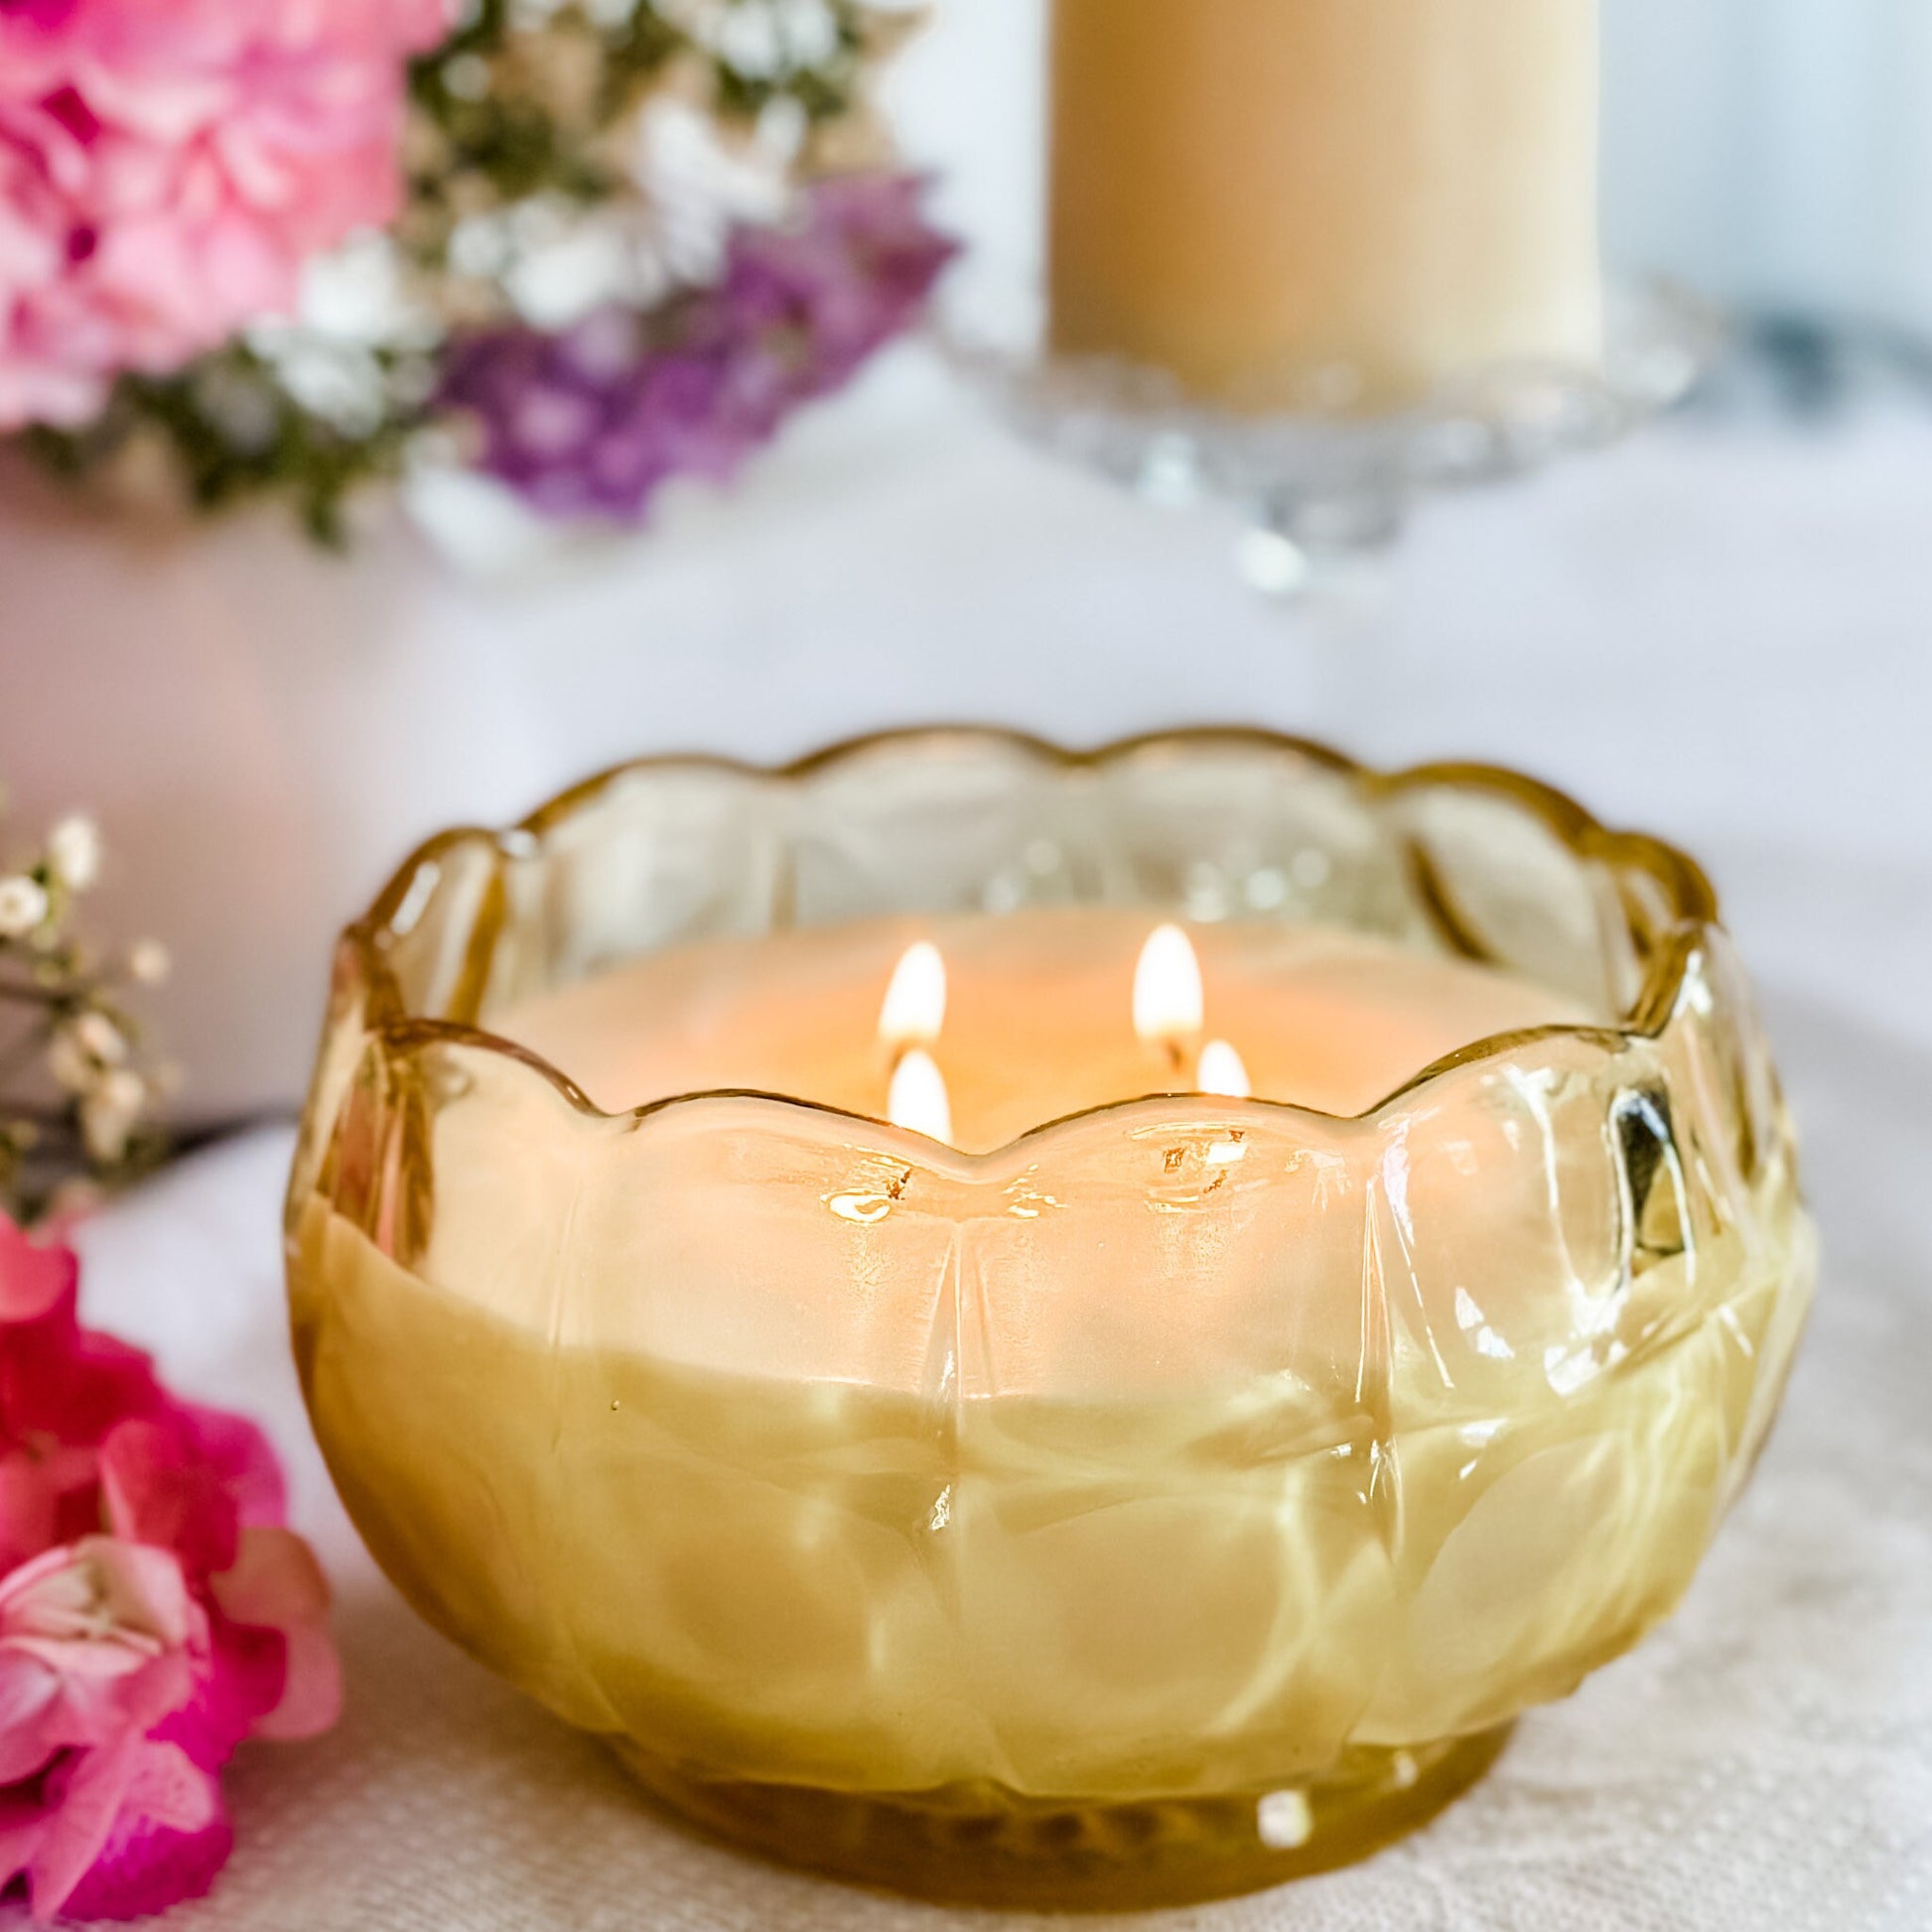 Vintage Indiana Glass Candle: Gardenia Tuberose in Yellow Mist Constellation Bowl